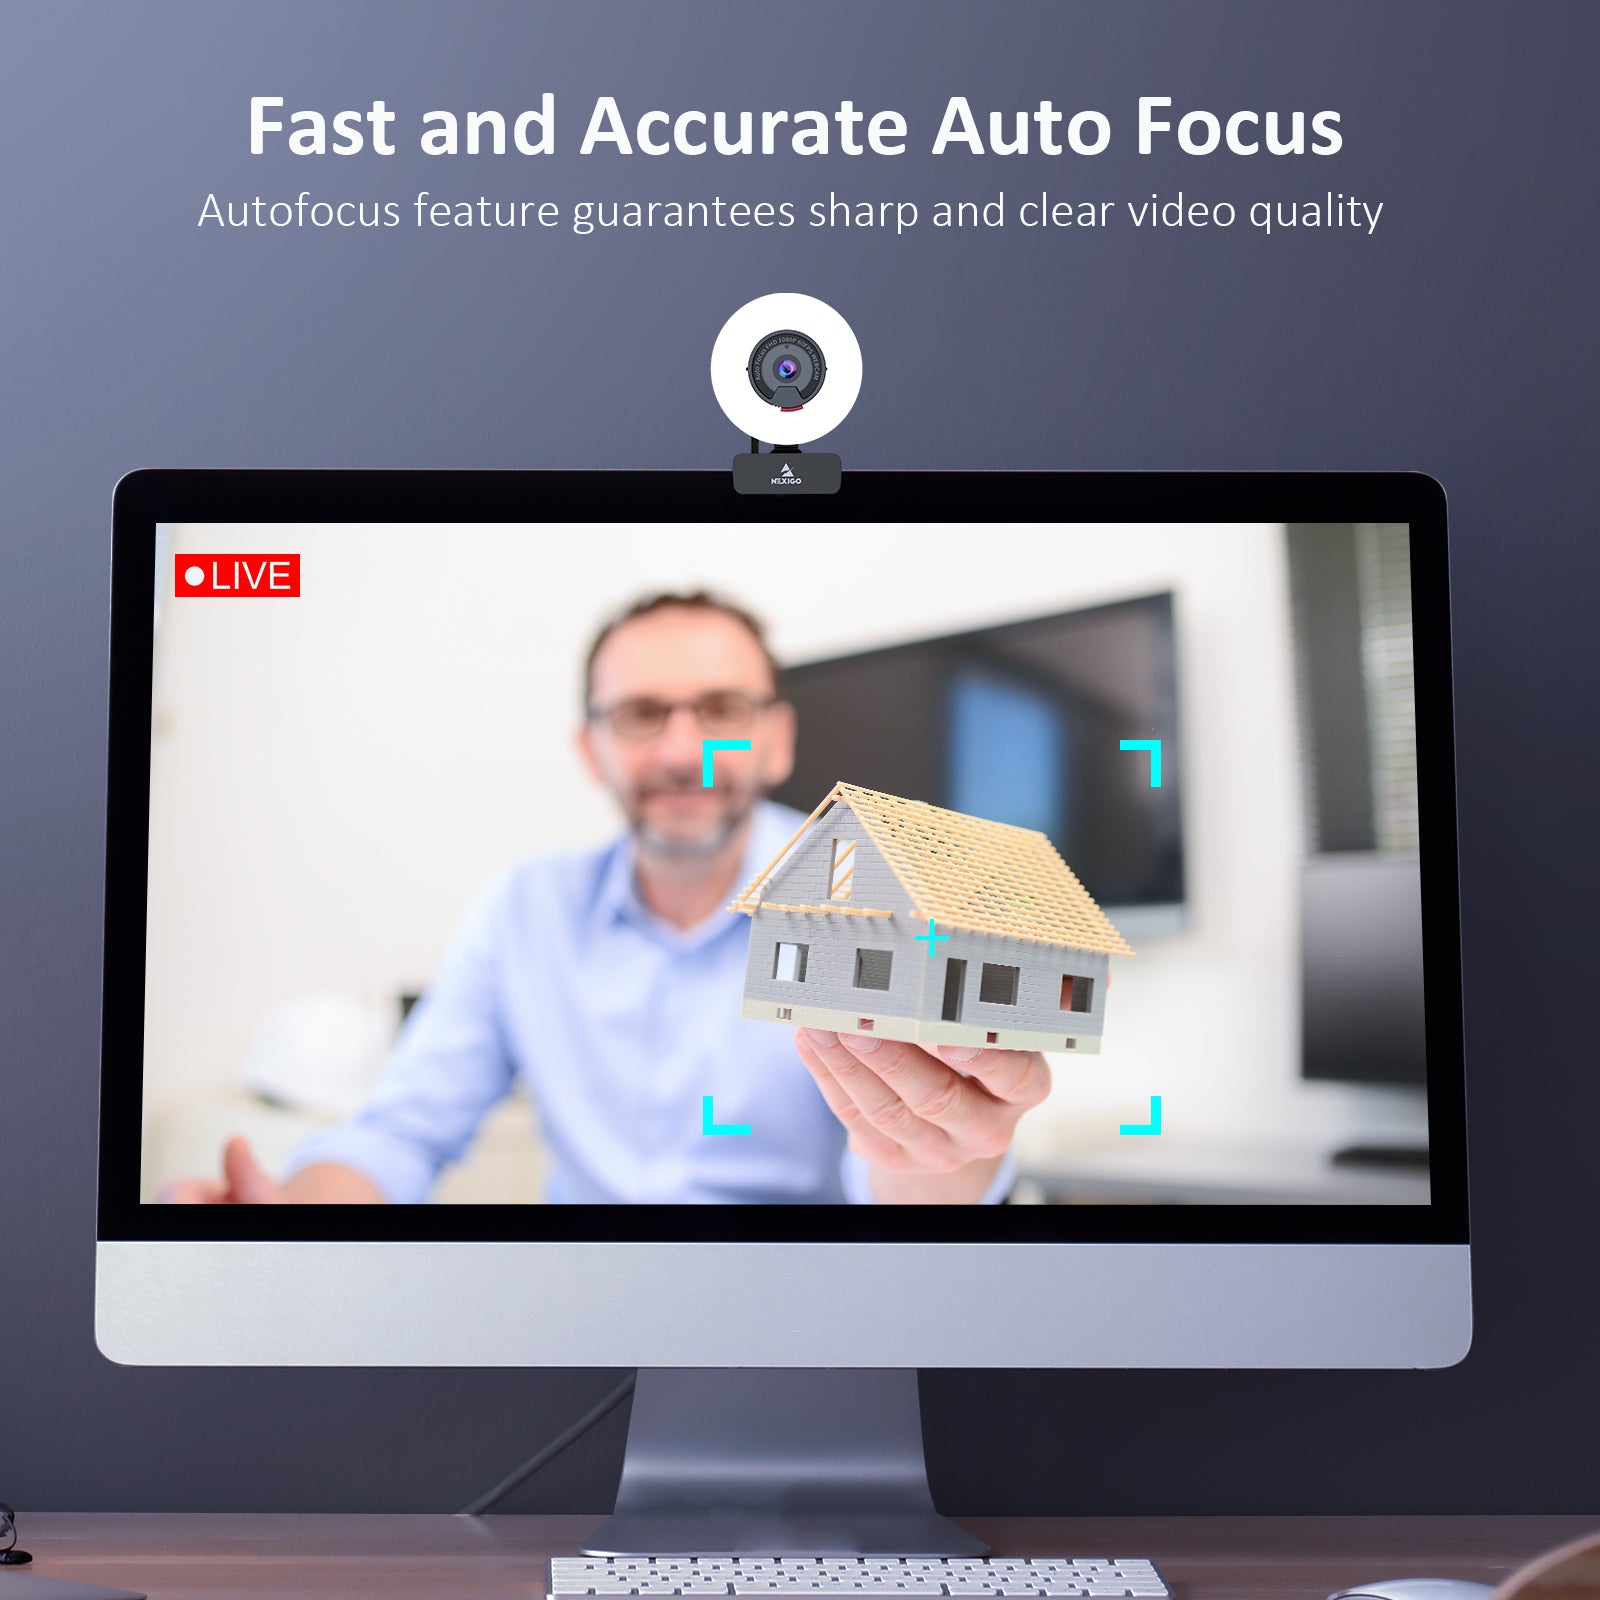 The webcam features autofocus, allowing quick automatic focusing on objects or people in the video